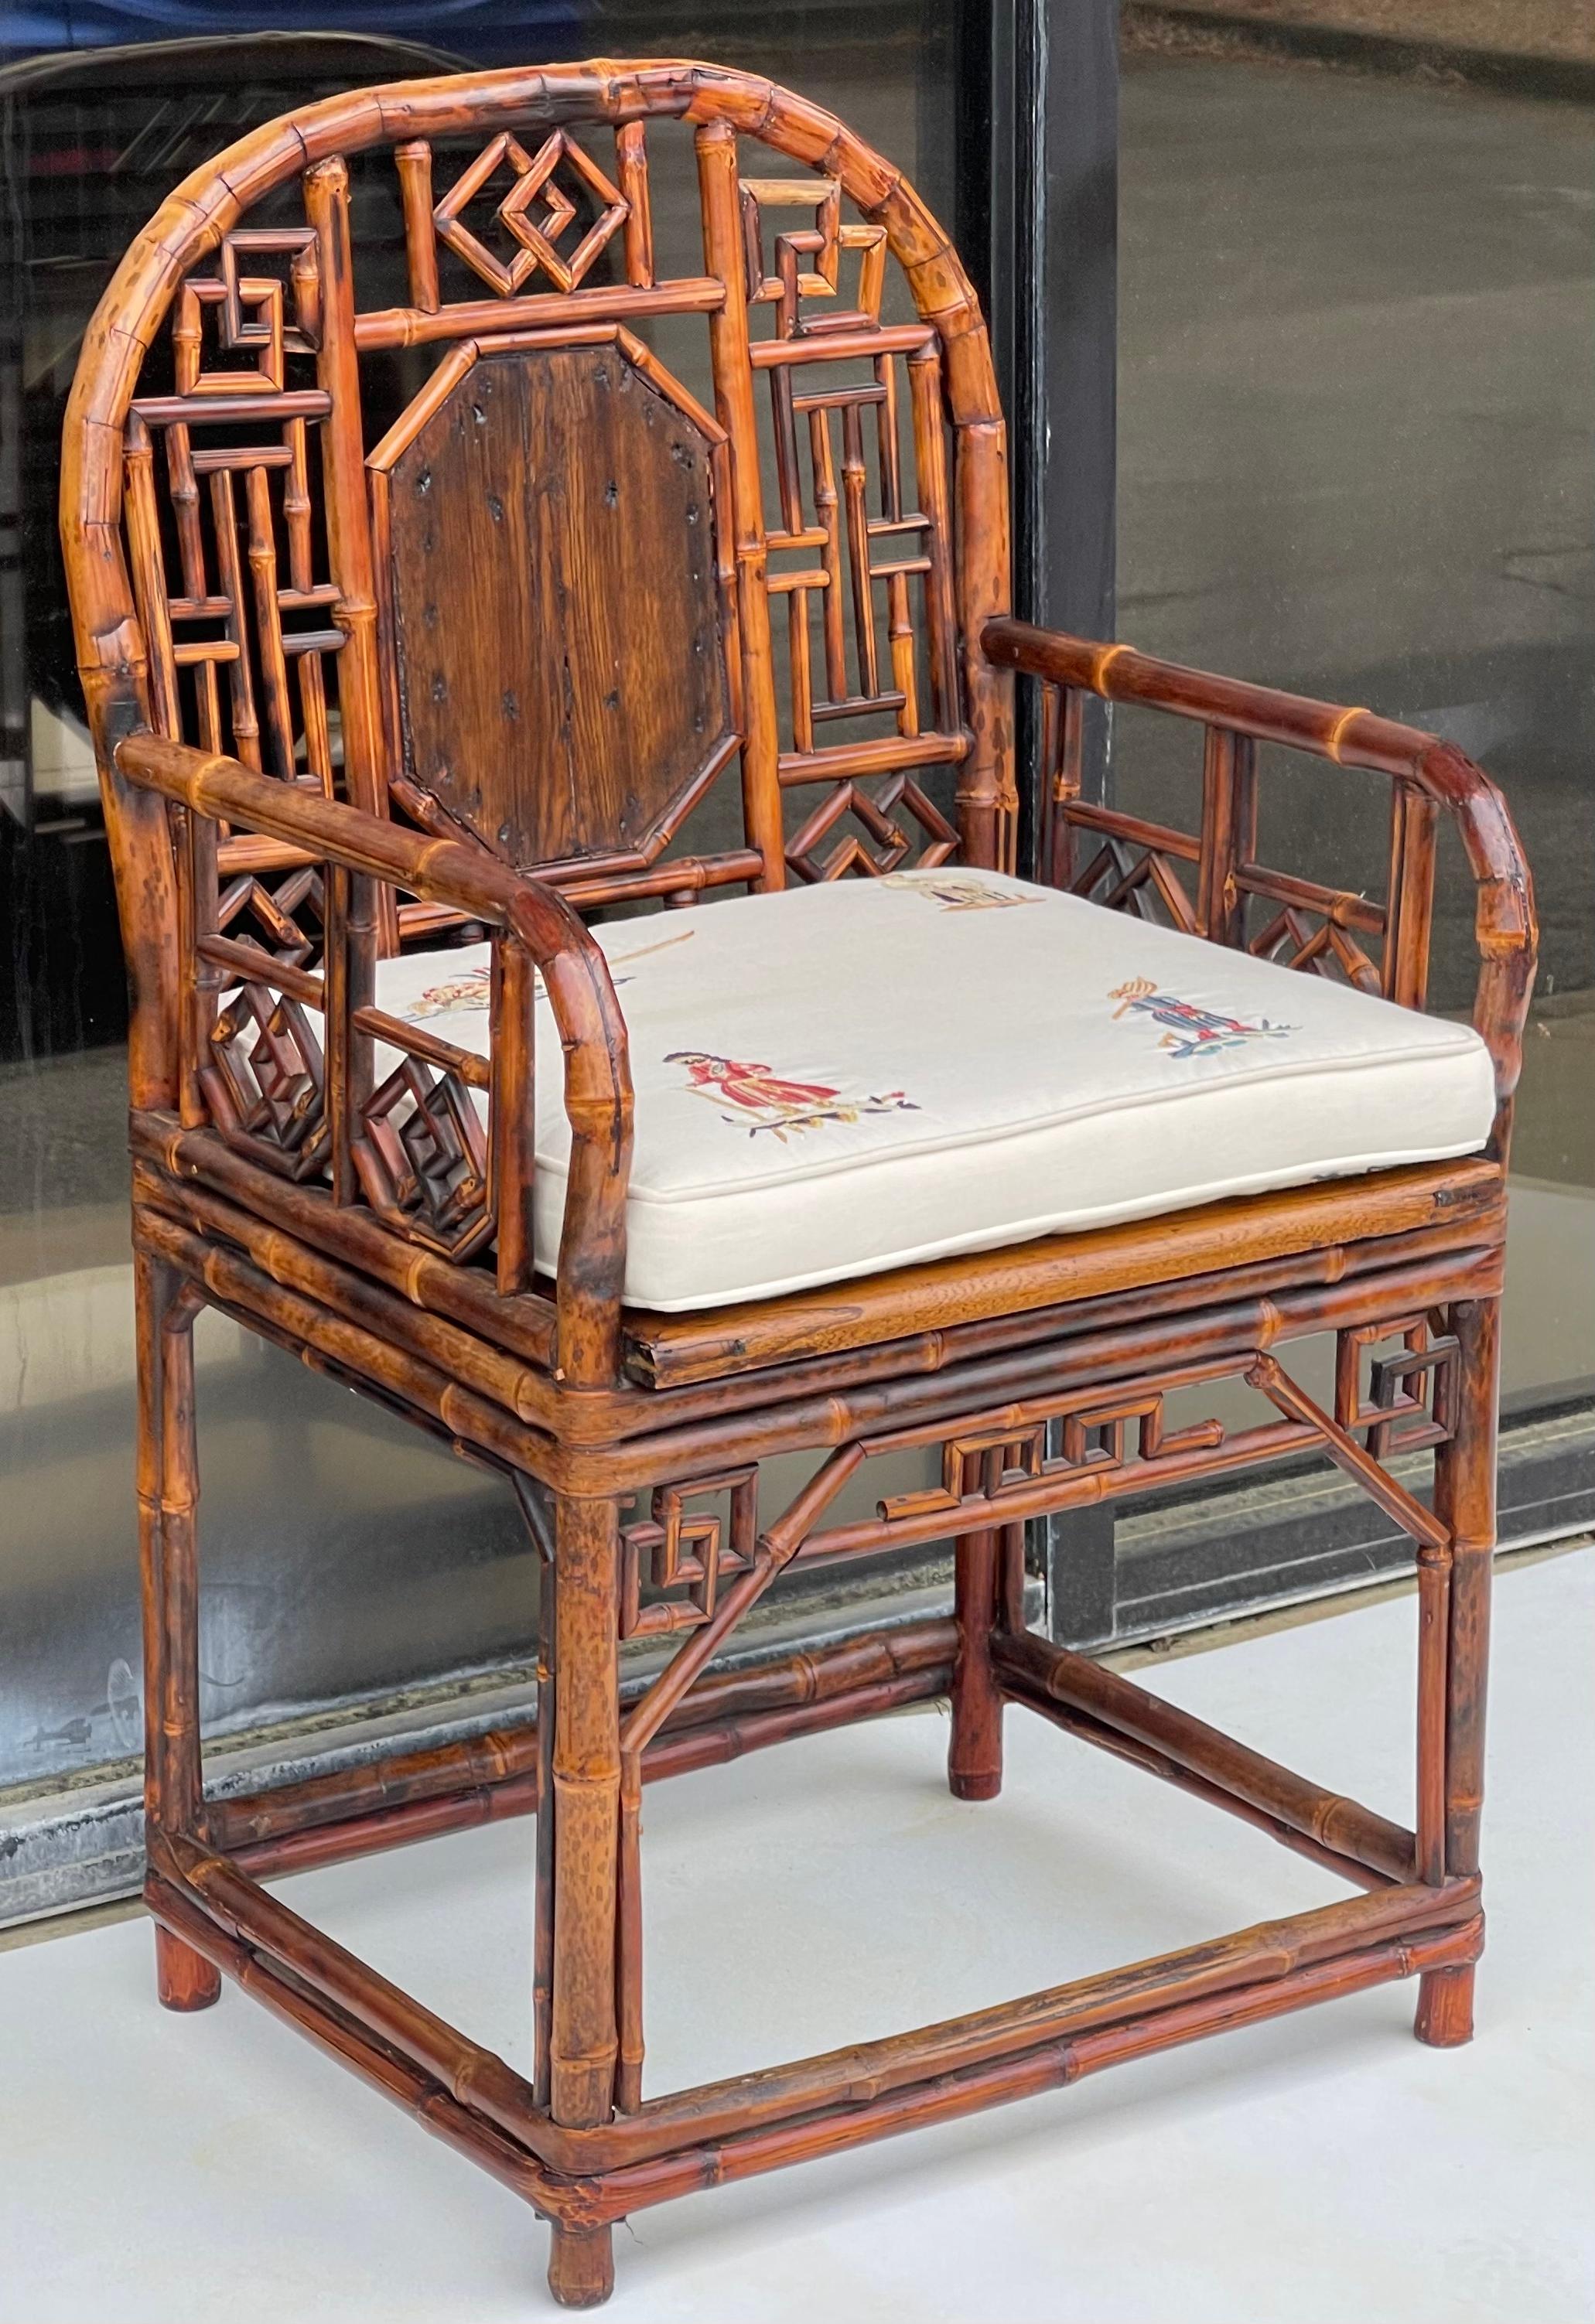 This is a wonderful Chinese Brighton style burnt bamboo arm chair. It has a vintage embroidered linen cushion that does show slight wear. It is in very good condition.